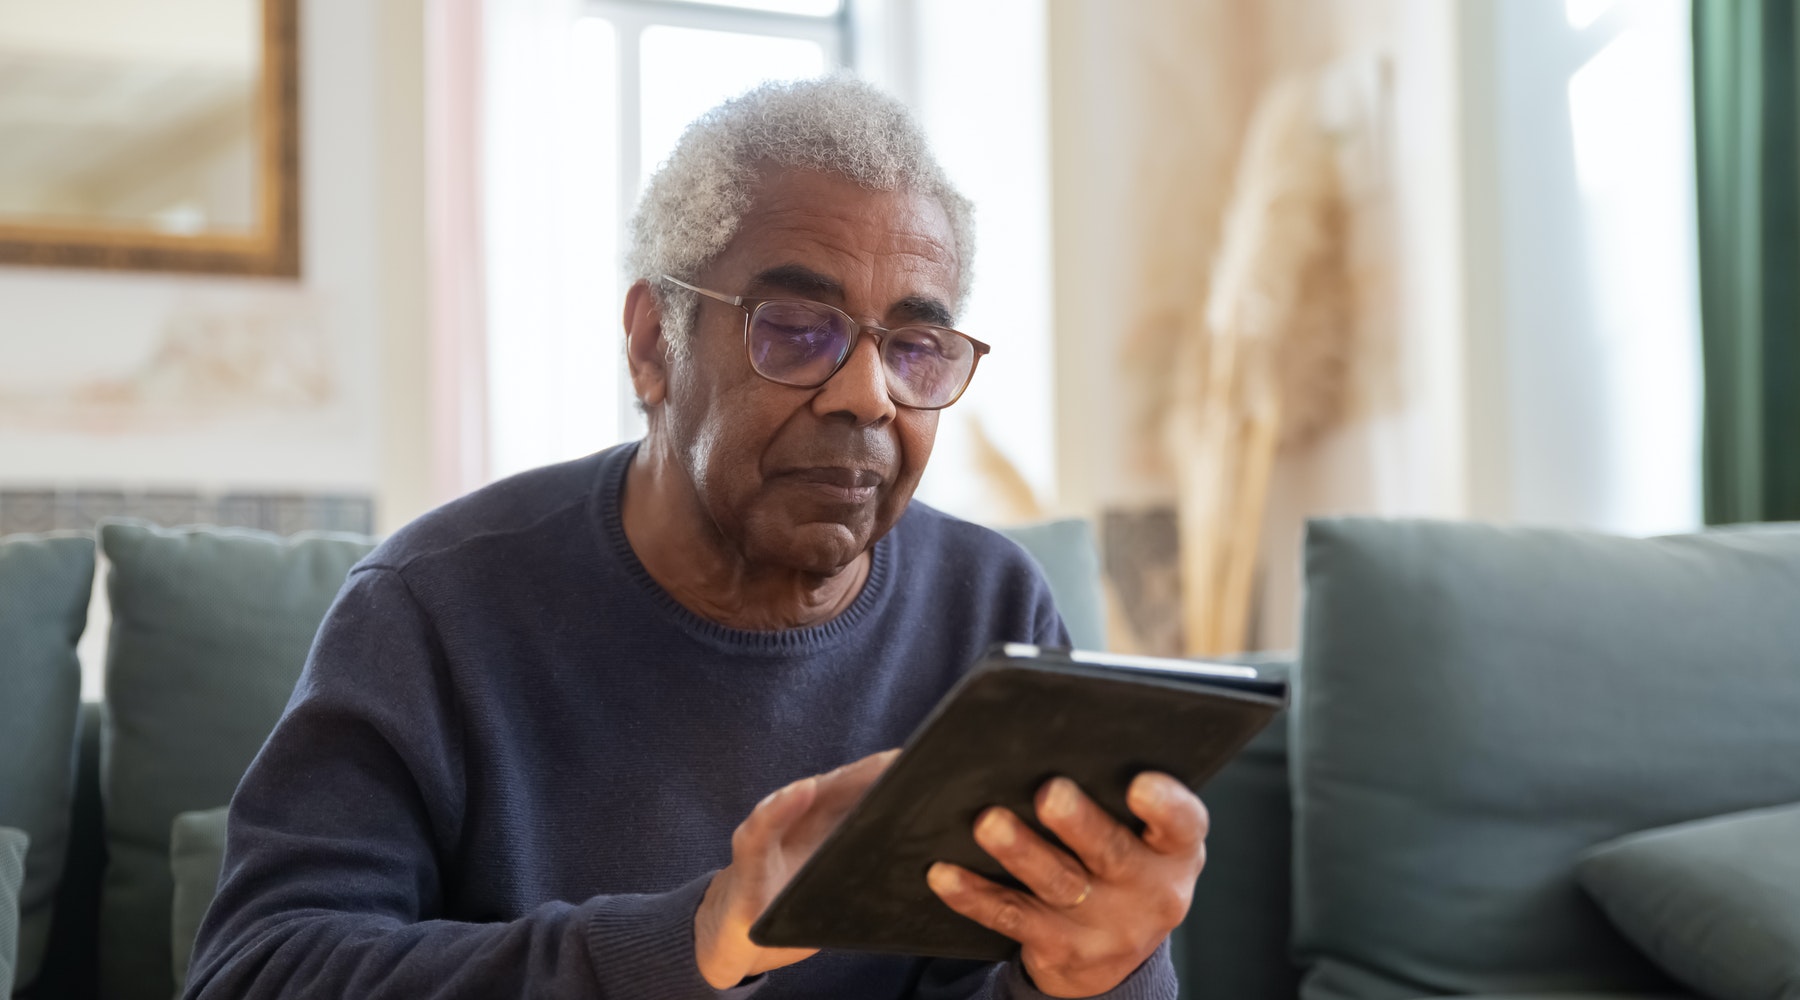 older man using a tablet at home